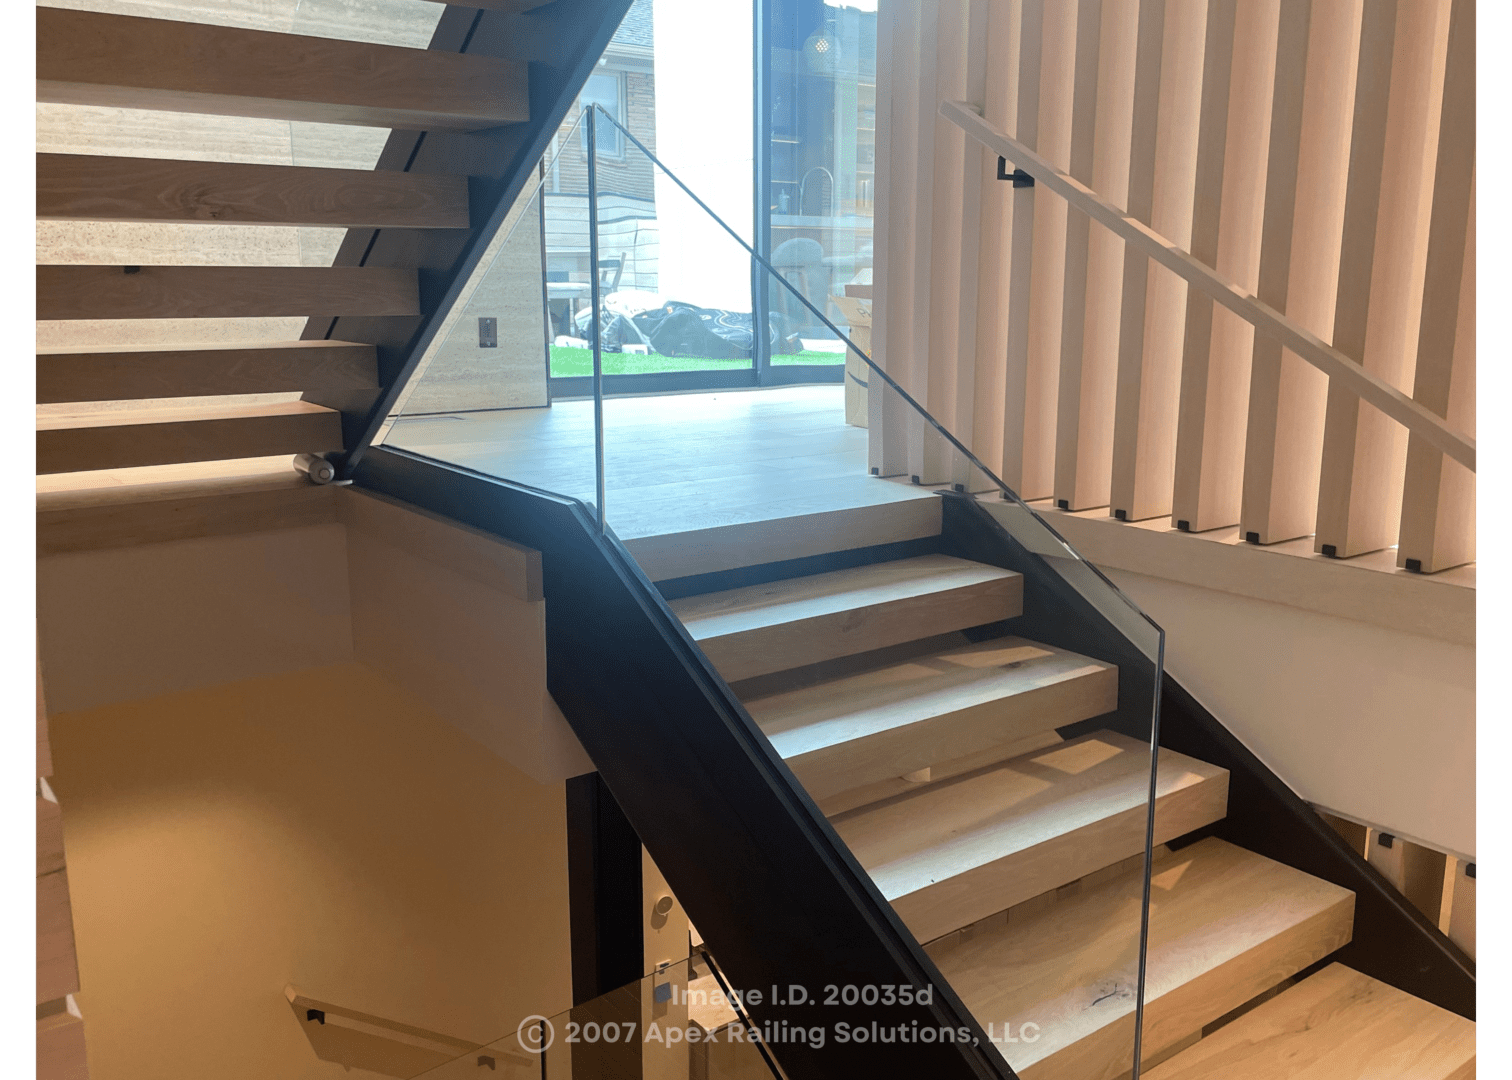 Custom staircase railings designed and installed using glass, aluminum or other materials